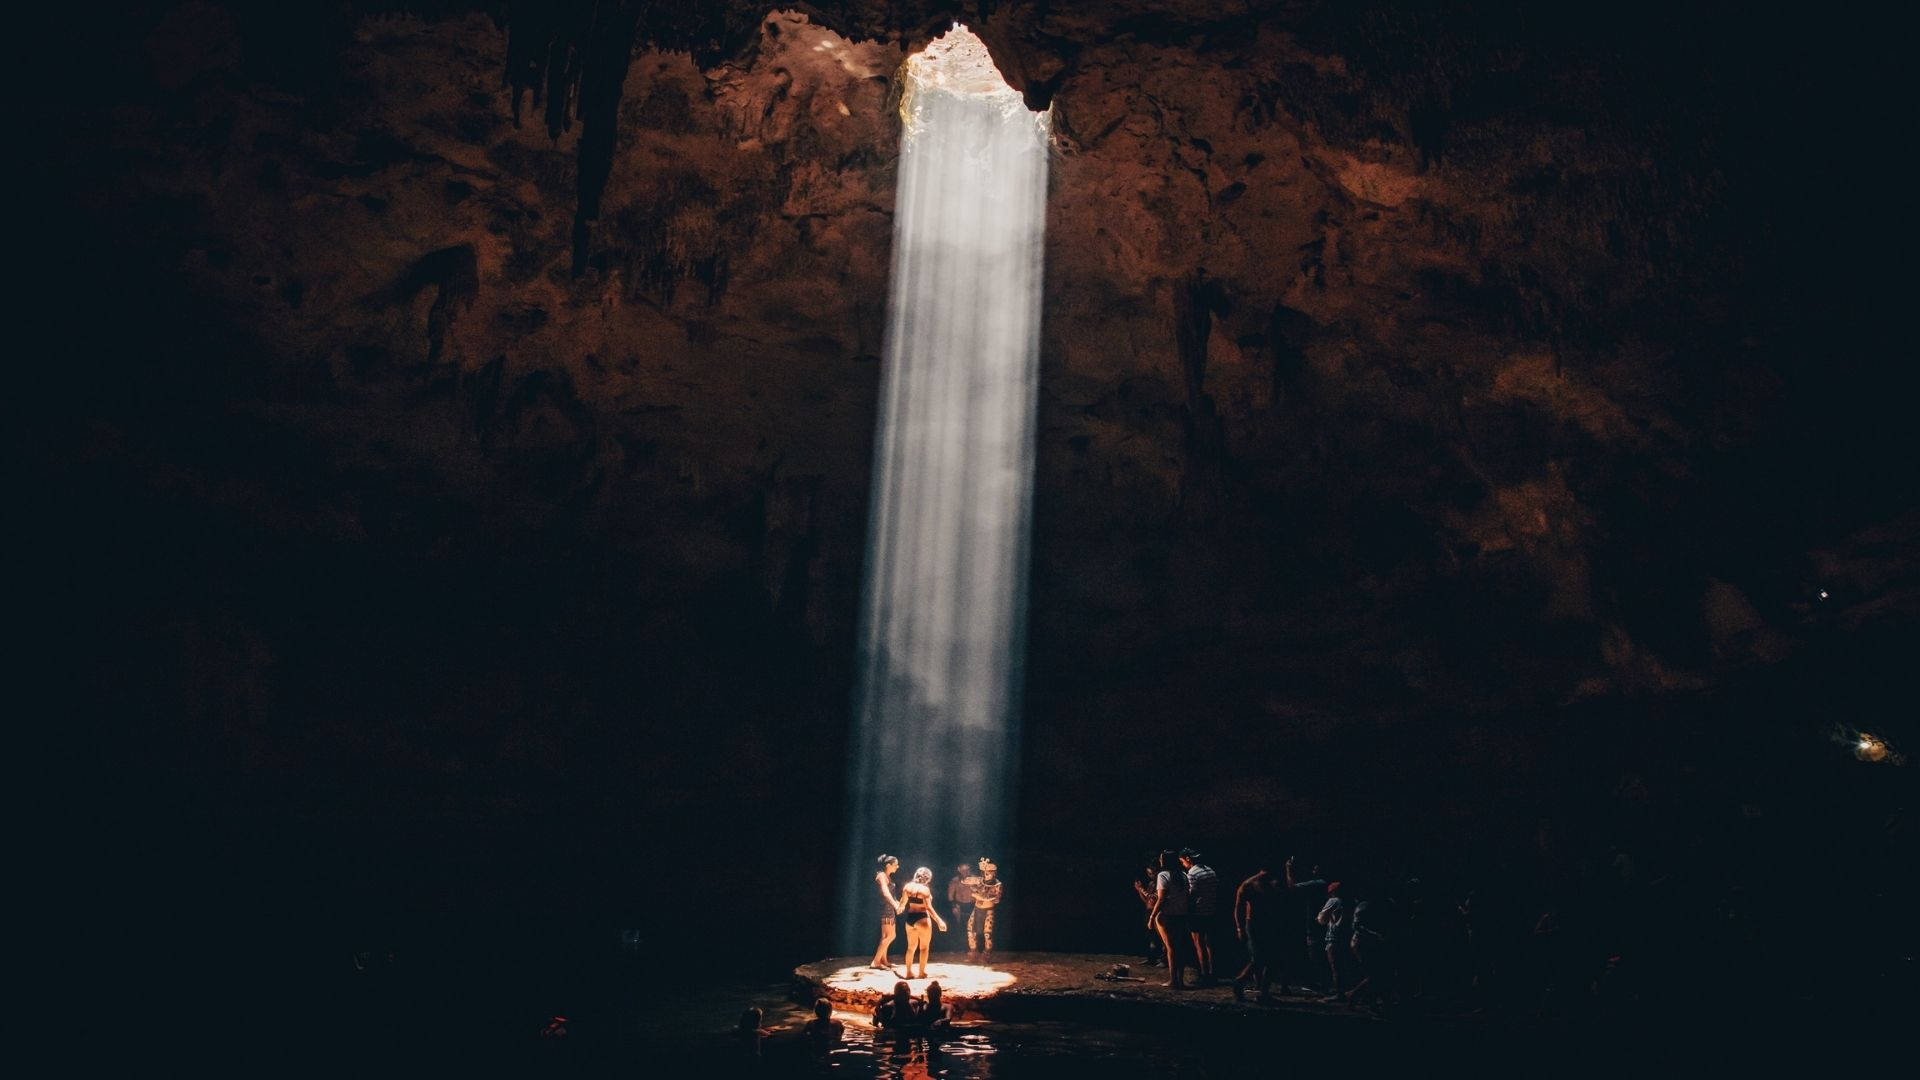 A group of tourists exploring an impressive natural cave Wallpaper